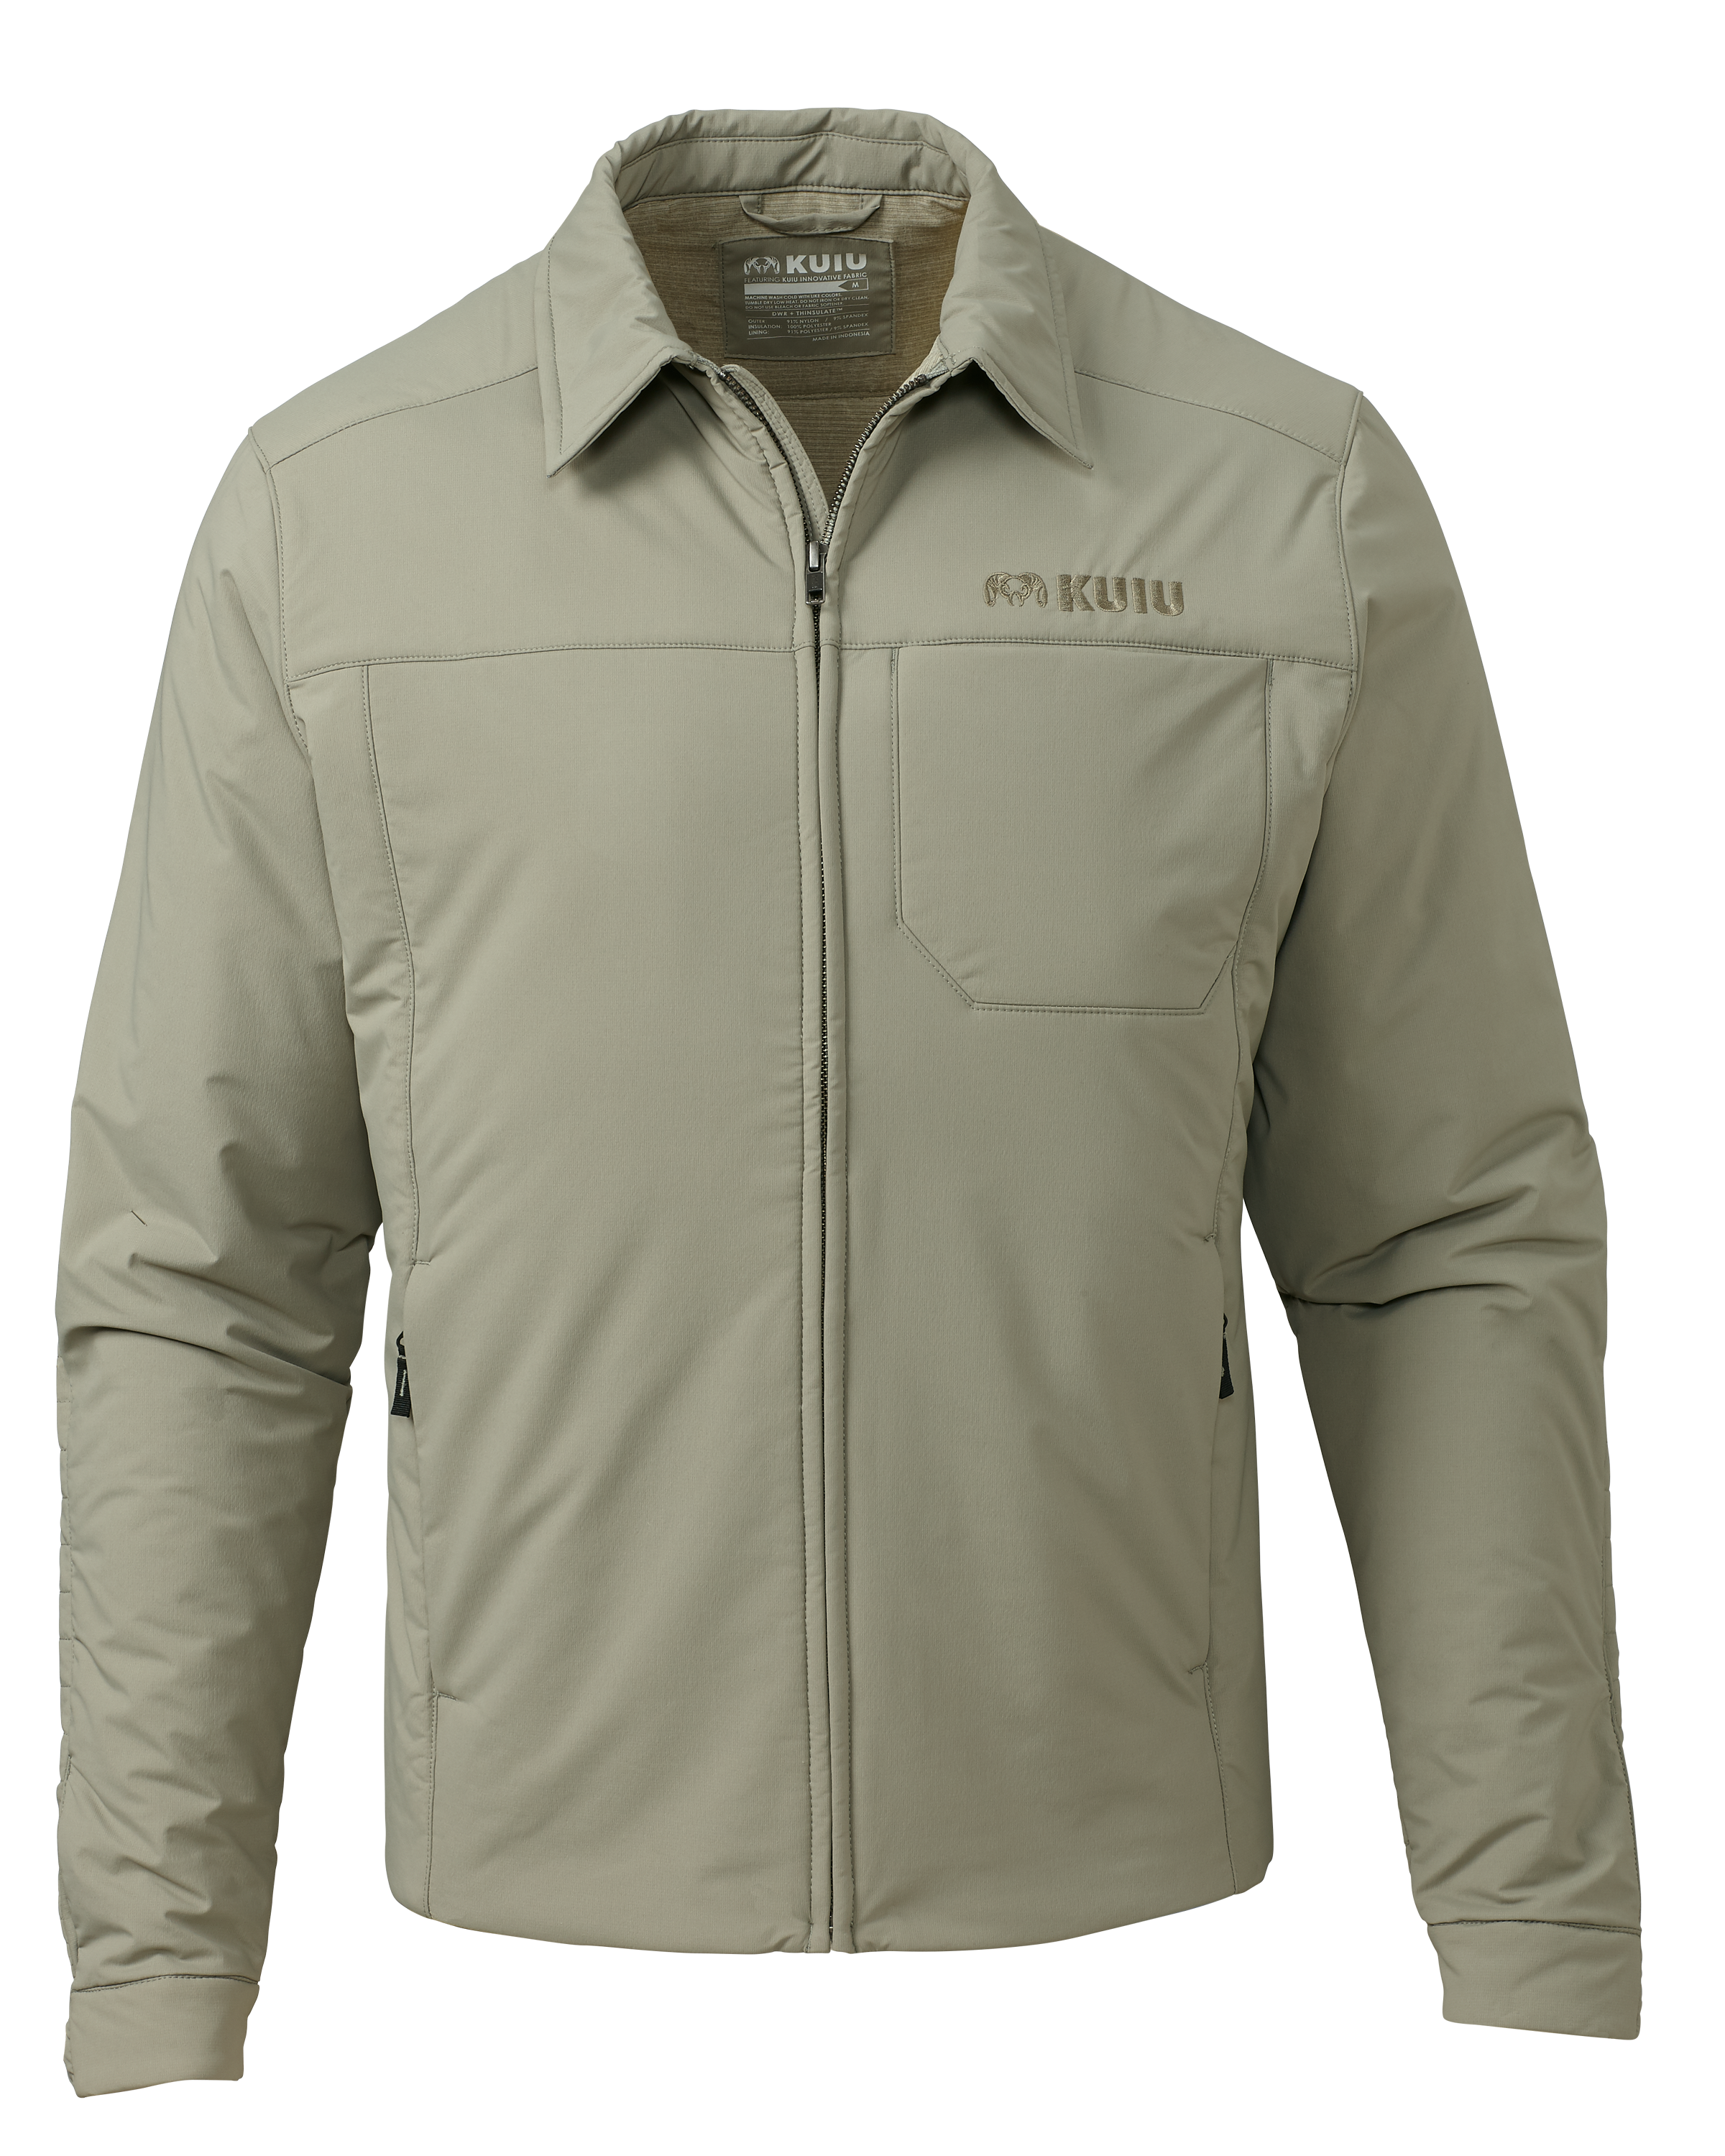 KUIU Outlet Fairbanks Hunting Jacket in Mineral | Size 3XL